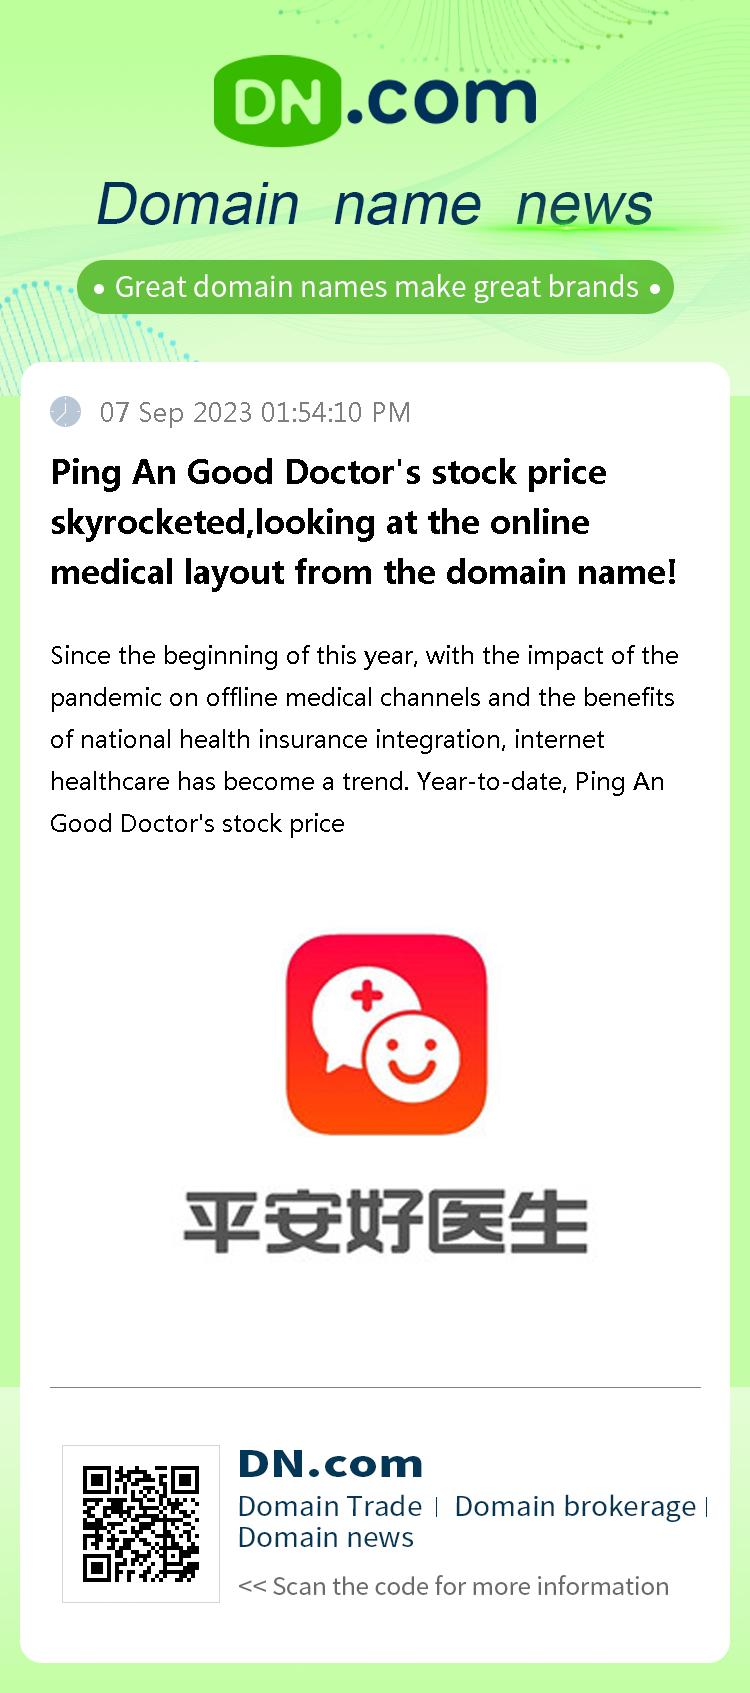 Ping An Good Doctor's stock price skyrocketed,looking at the online medical layout from the domain name!